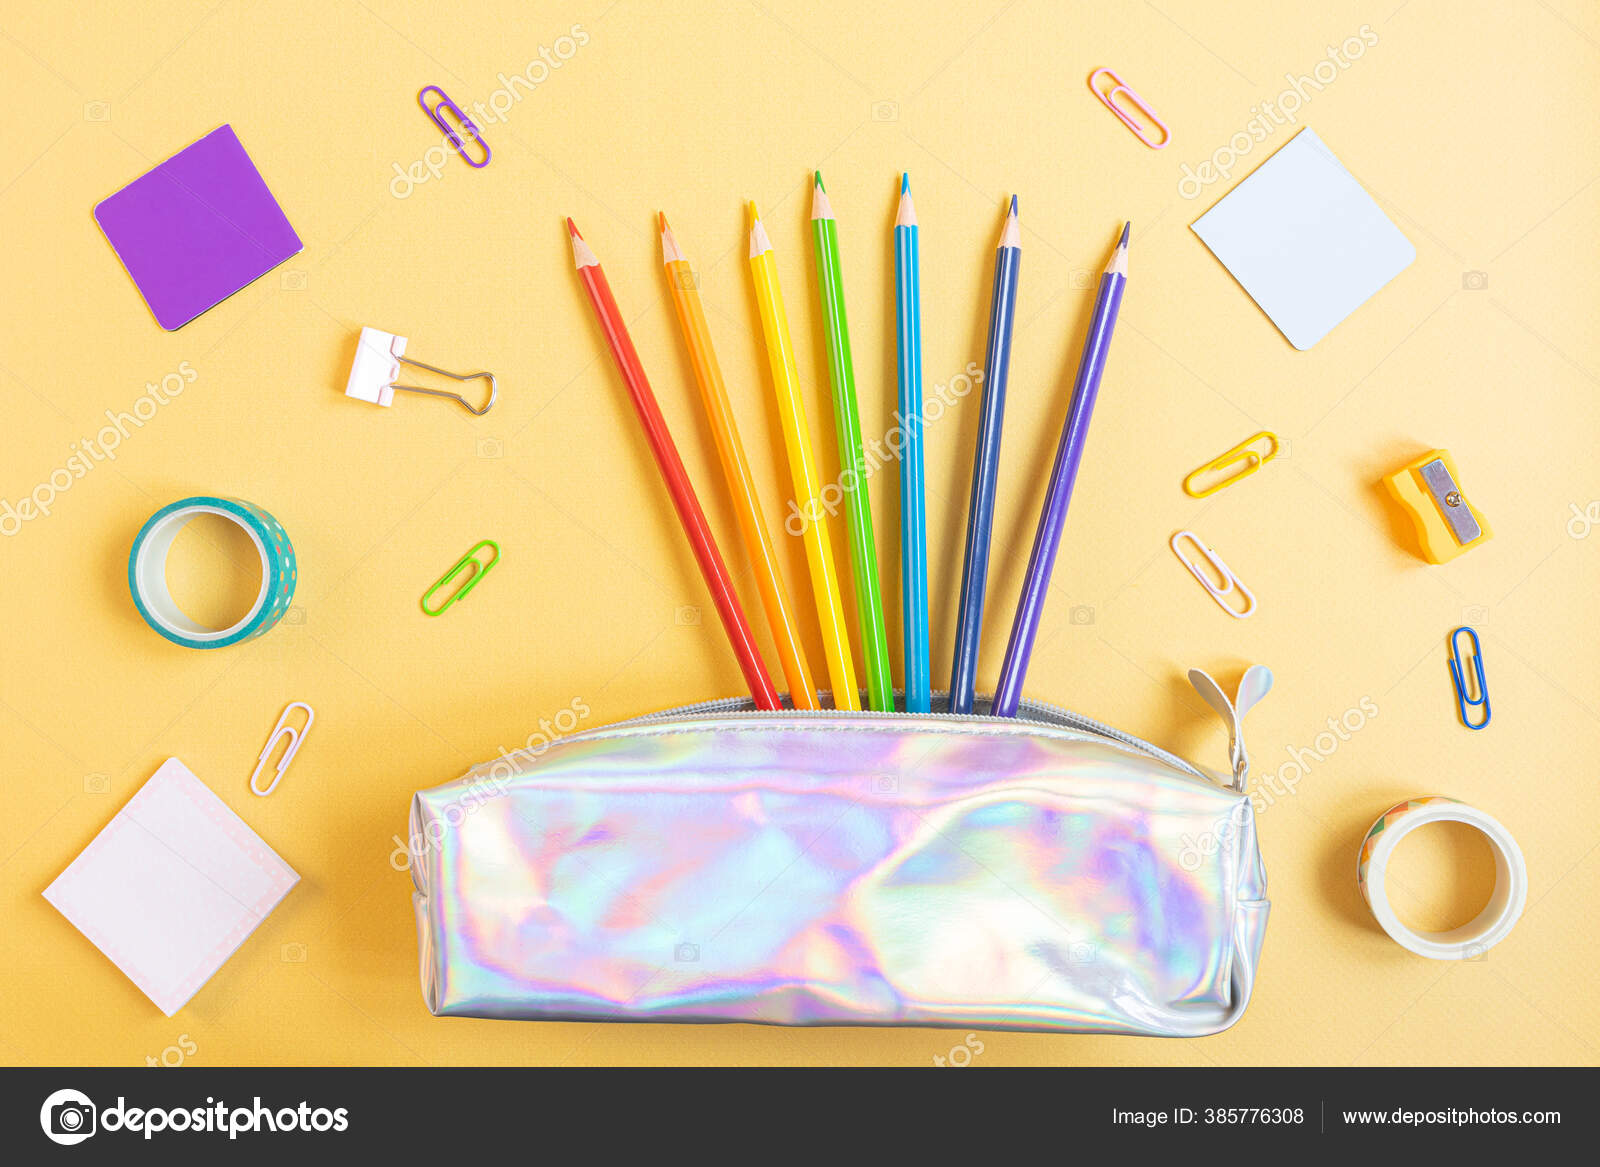 School Supplies And Coloring Pens Flat Lay On Yellow Background